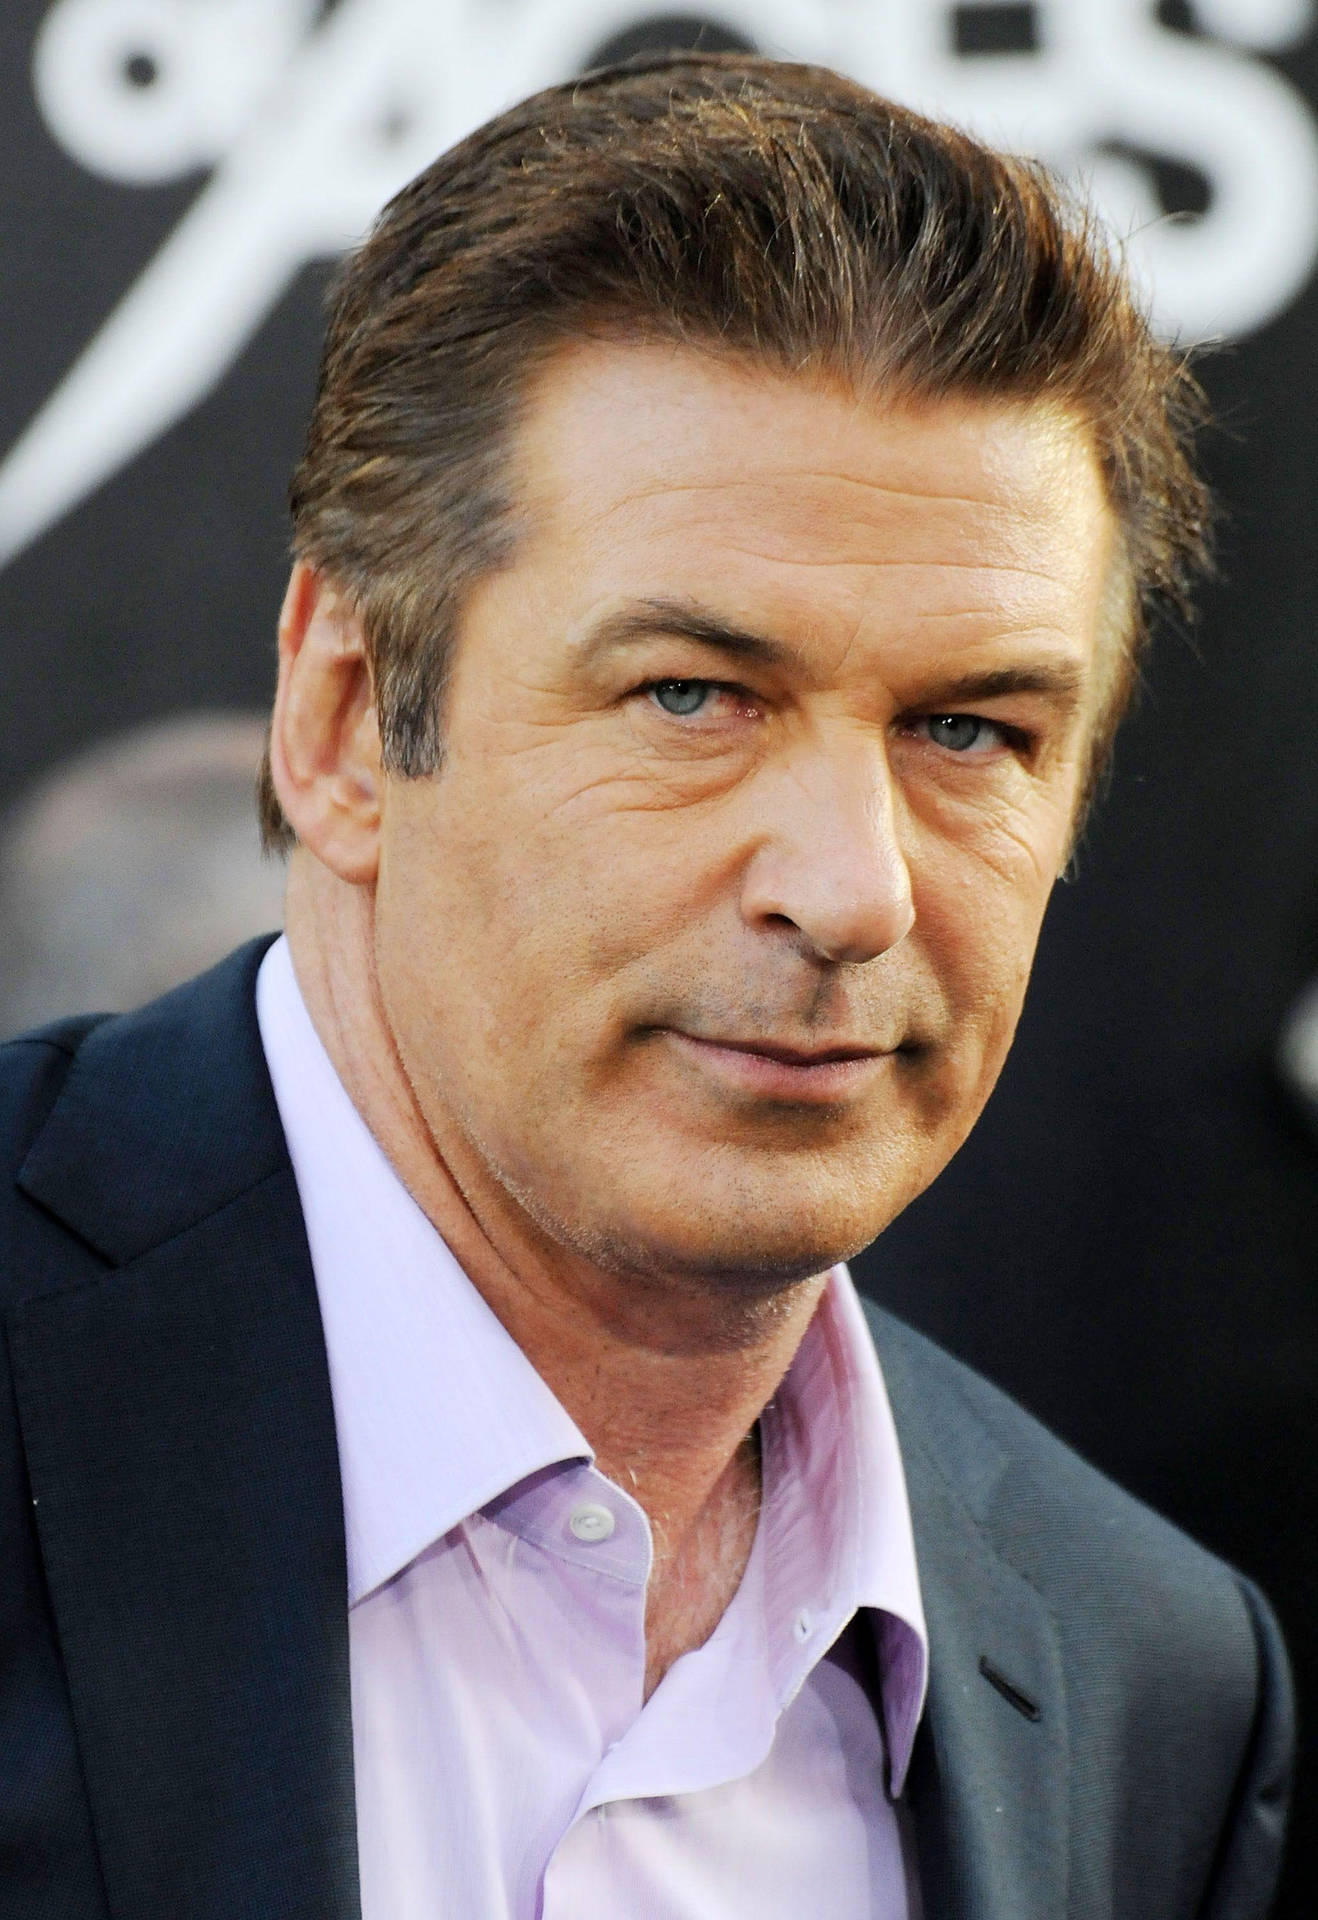 Esteemed Actor Alec Baldwin At A Red Carpet Event Background